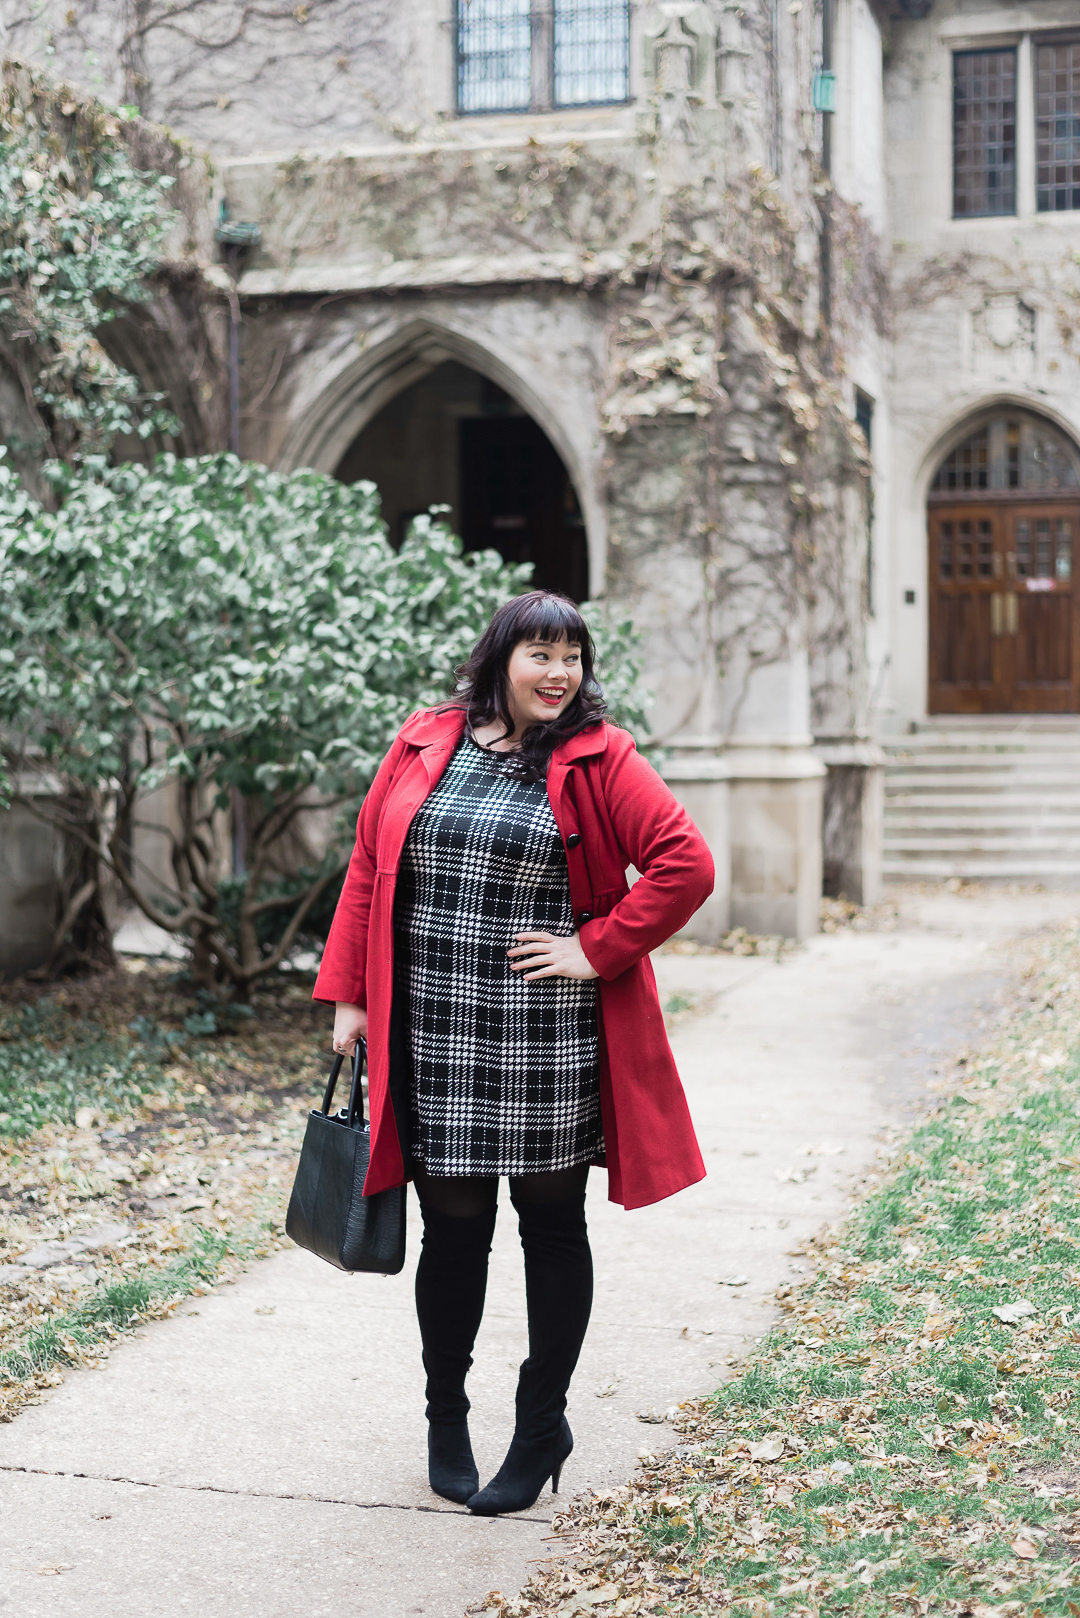 Just My Size Plus Size Dresses, Plaid, Bell sleeves, Plus Size Style, Plus Size Fashion, Style Plus Curves, Chicago Blogger, Chicago Plus Size Blogger, Plus Size Blogger, Amber McCulloch